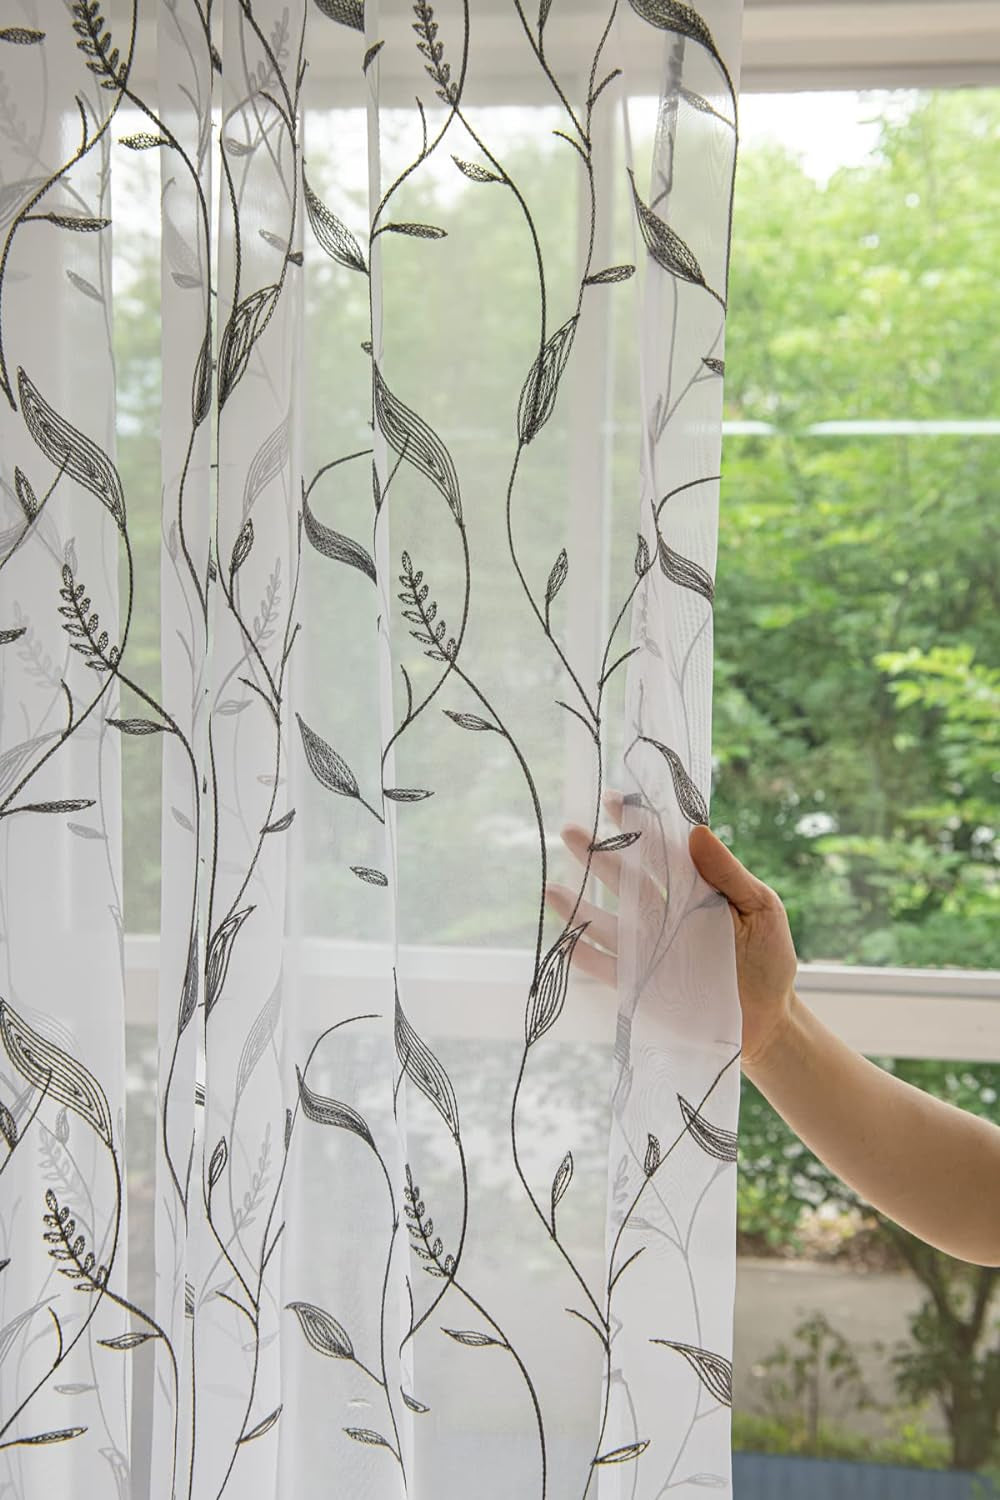 MOONVAN Windows Semi White Sheer Curtains 84 Inches Length 52 Inches Width 2 Panels Set Translucent Sheer Curtain Basic Rod Pocket for Bedroom Children Living Room Yard Kitchen  MOONVAN White-Embroider-Grey Leaf 52"W X 95"L 